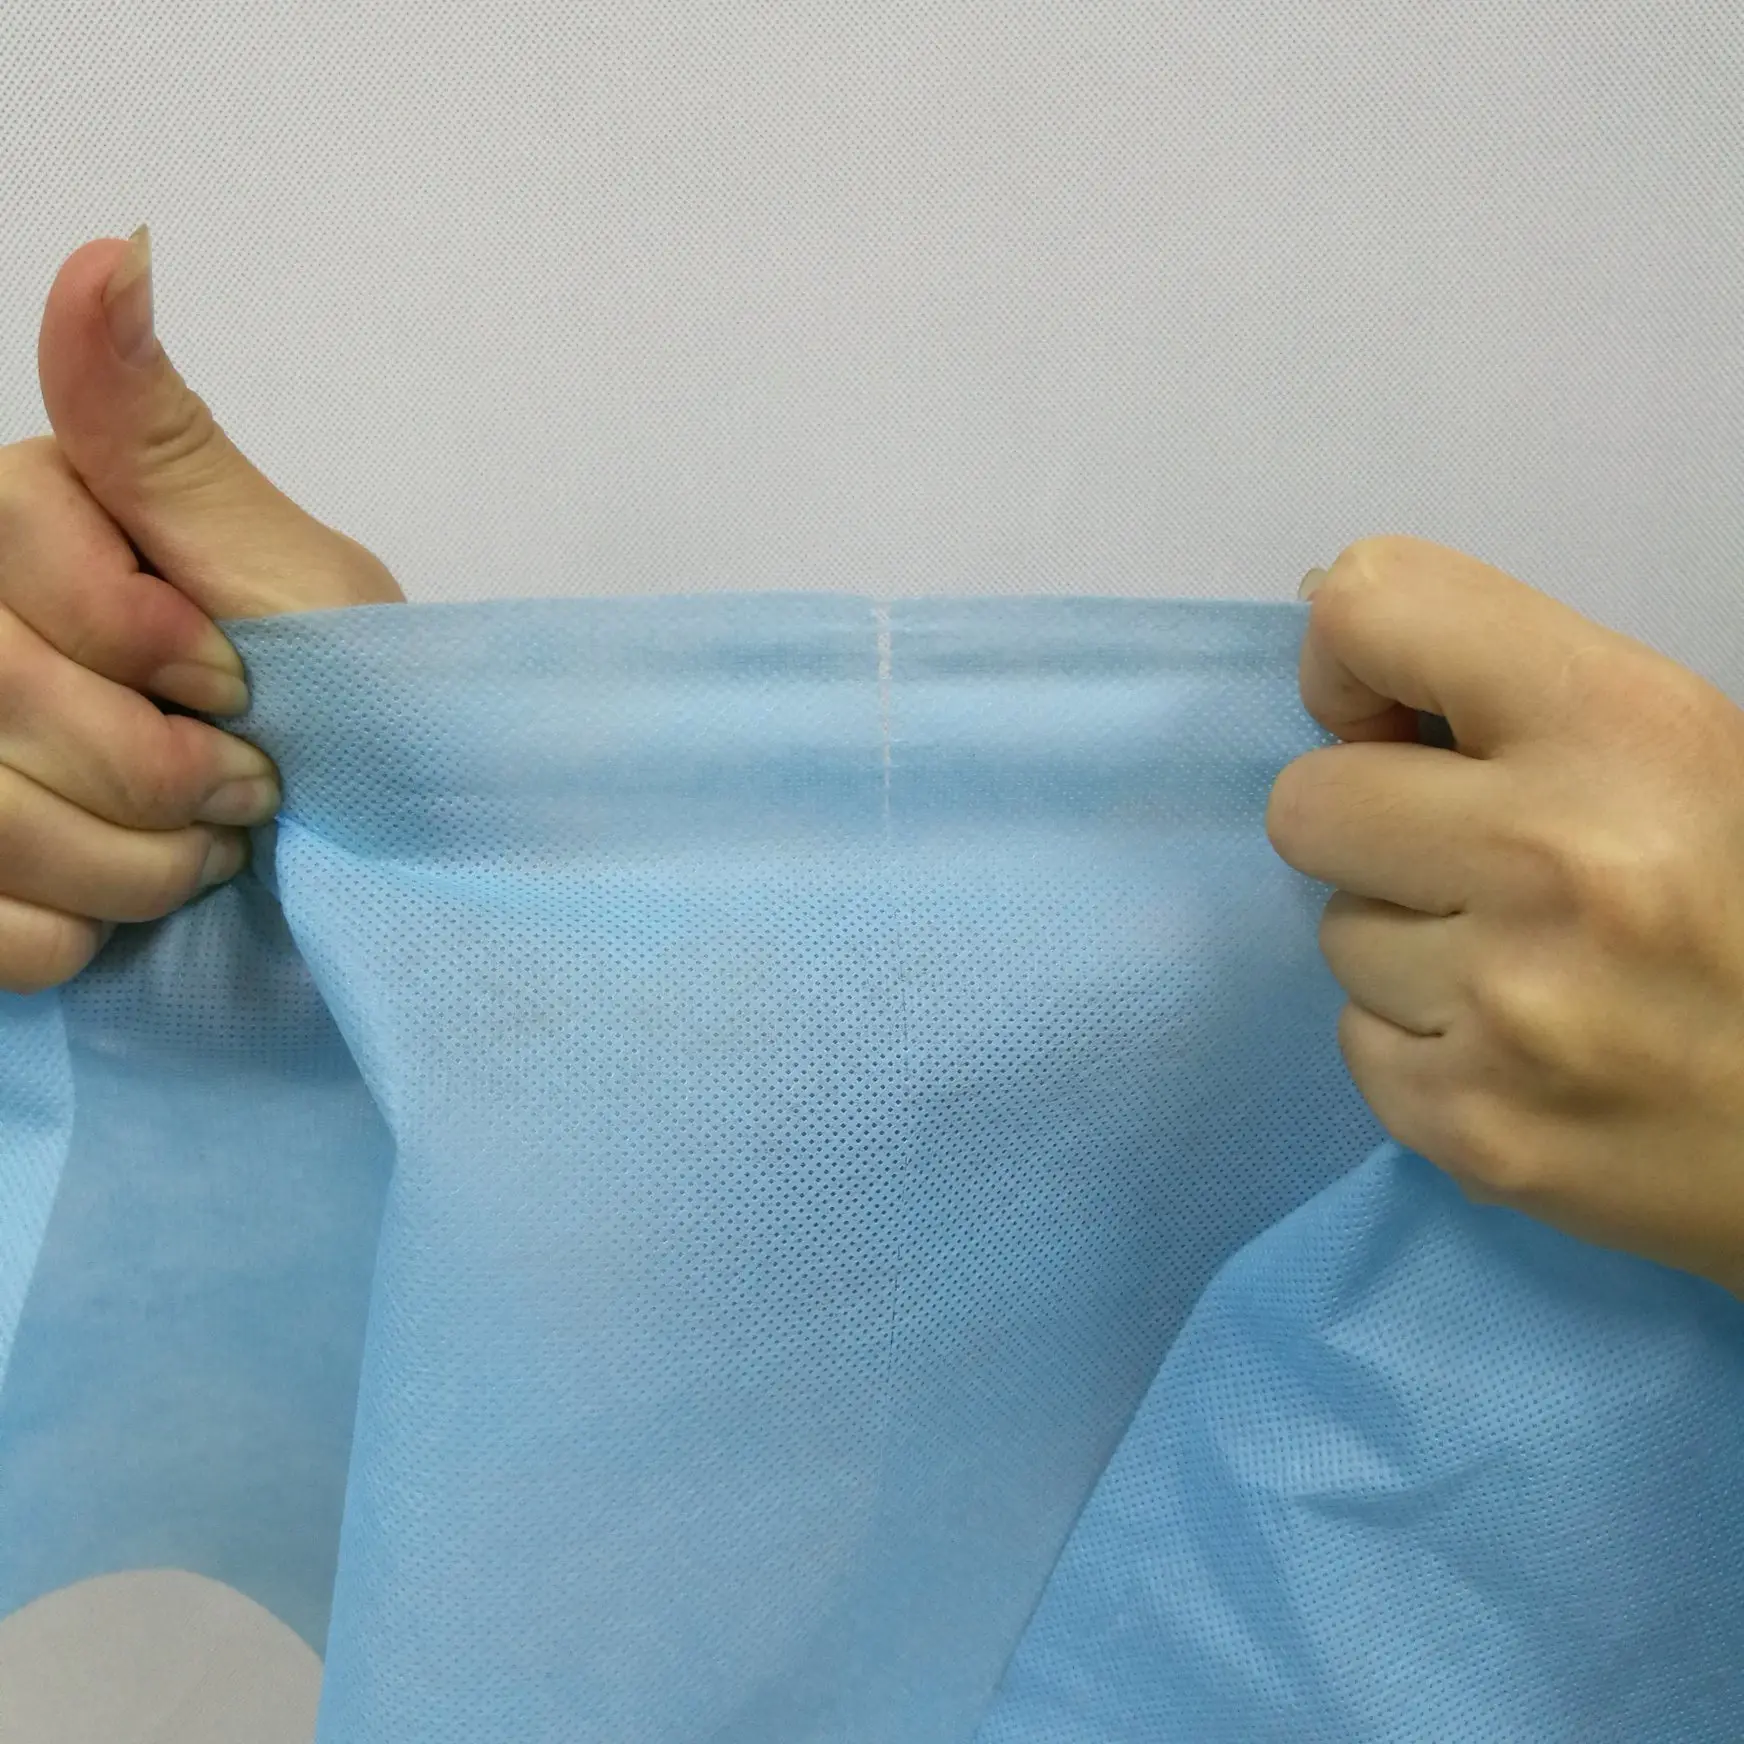 Spunbonded Nonwoven Fabric with Preforated